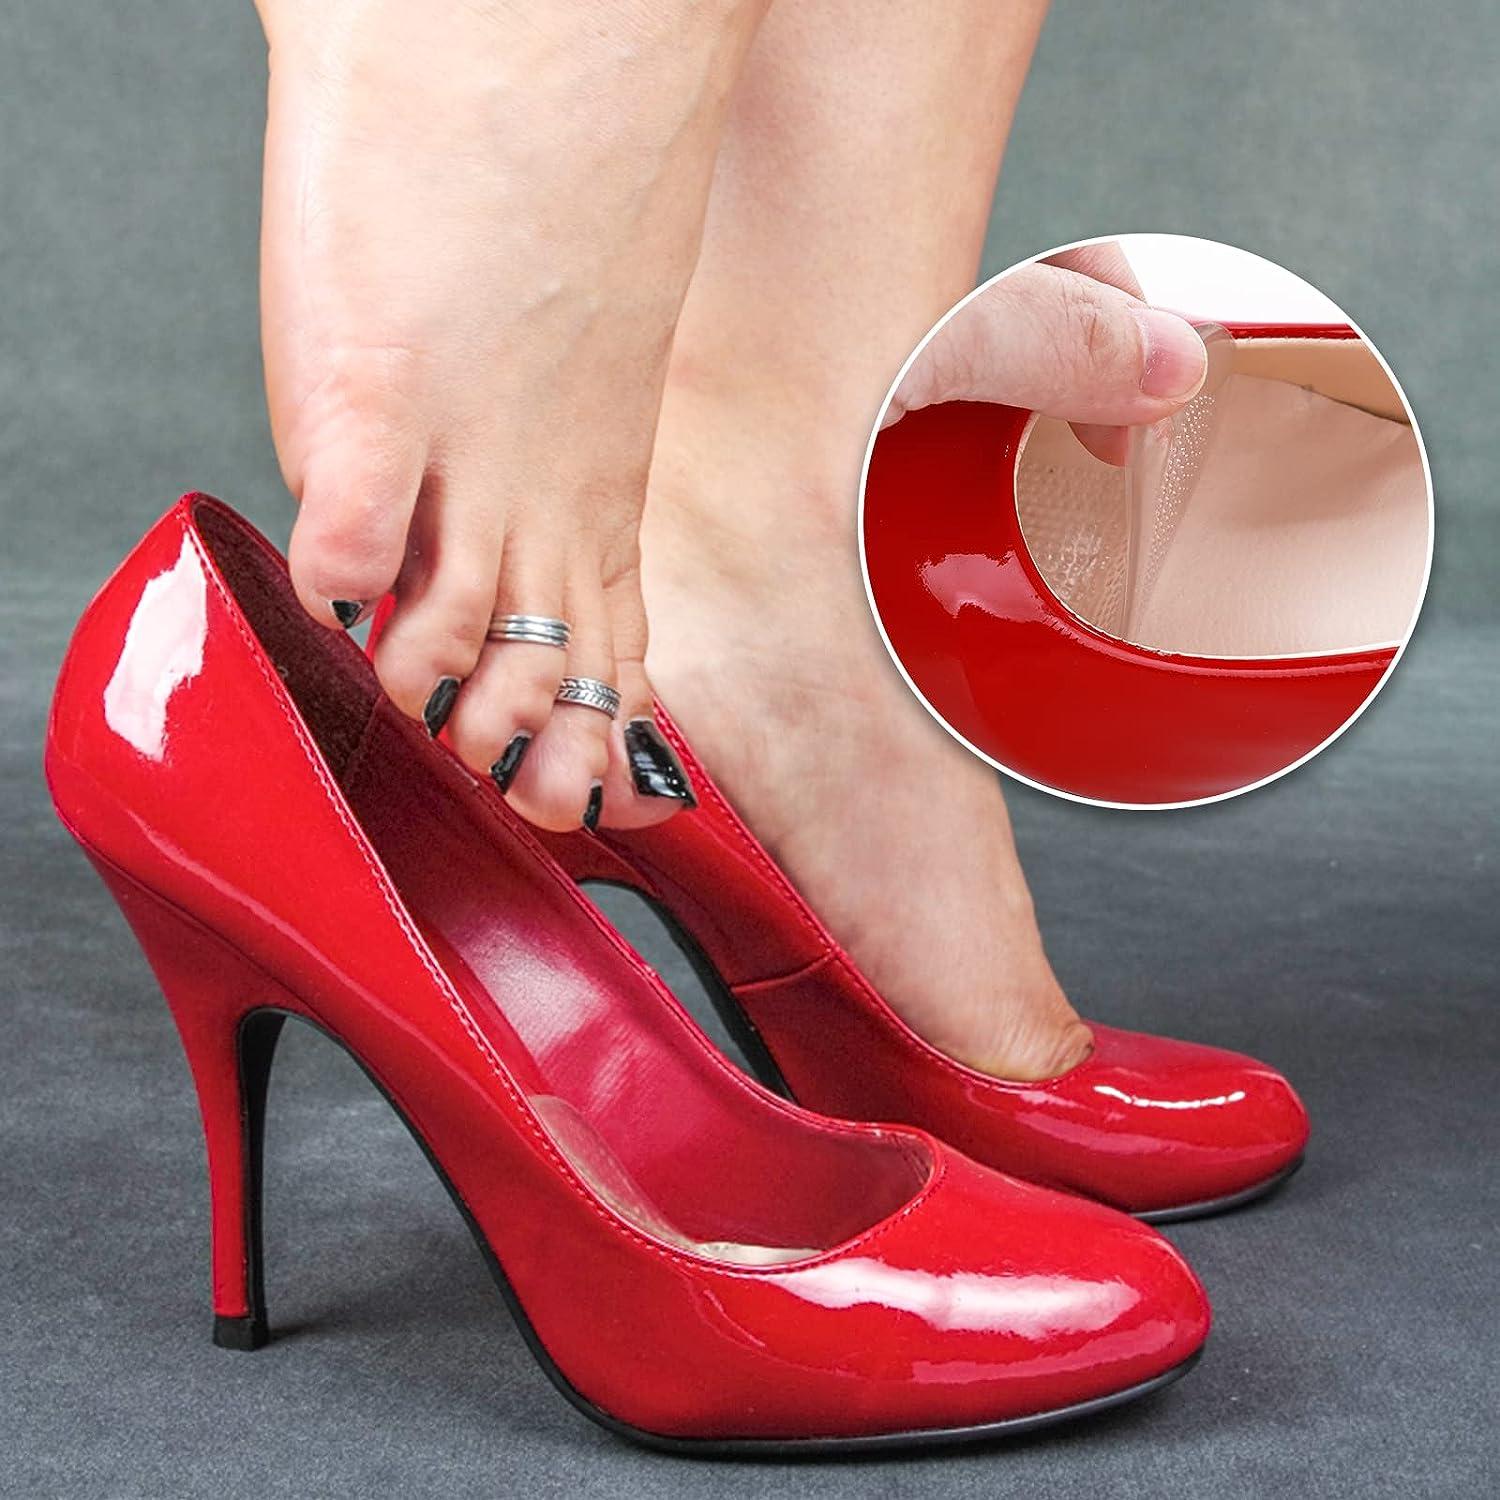 Gel Shoe Inserts Heels - Insoles Shoes Forefoot Pads Women High